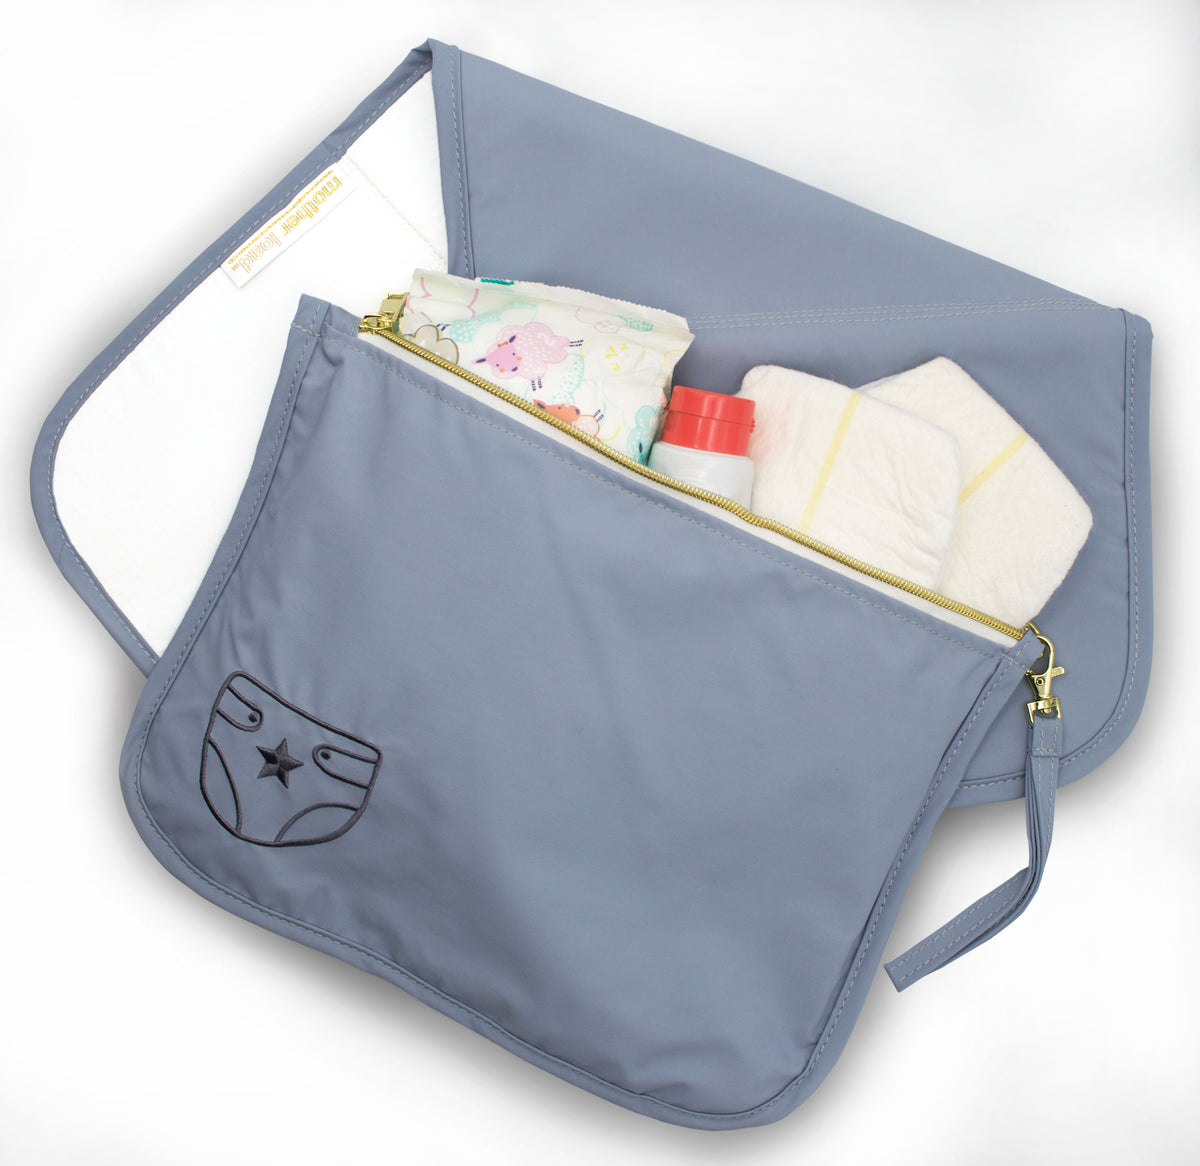 Diaper Bag Organizer Pouches by MOTHER LOAD - Worry-Free, Outing Essentials  for Your On-The-Go Family, Includes Snack Bag, Toy Pouch, New Mom Stuff